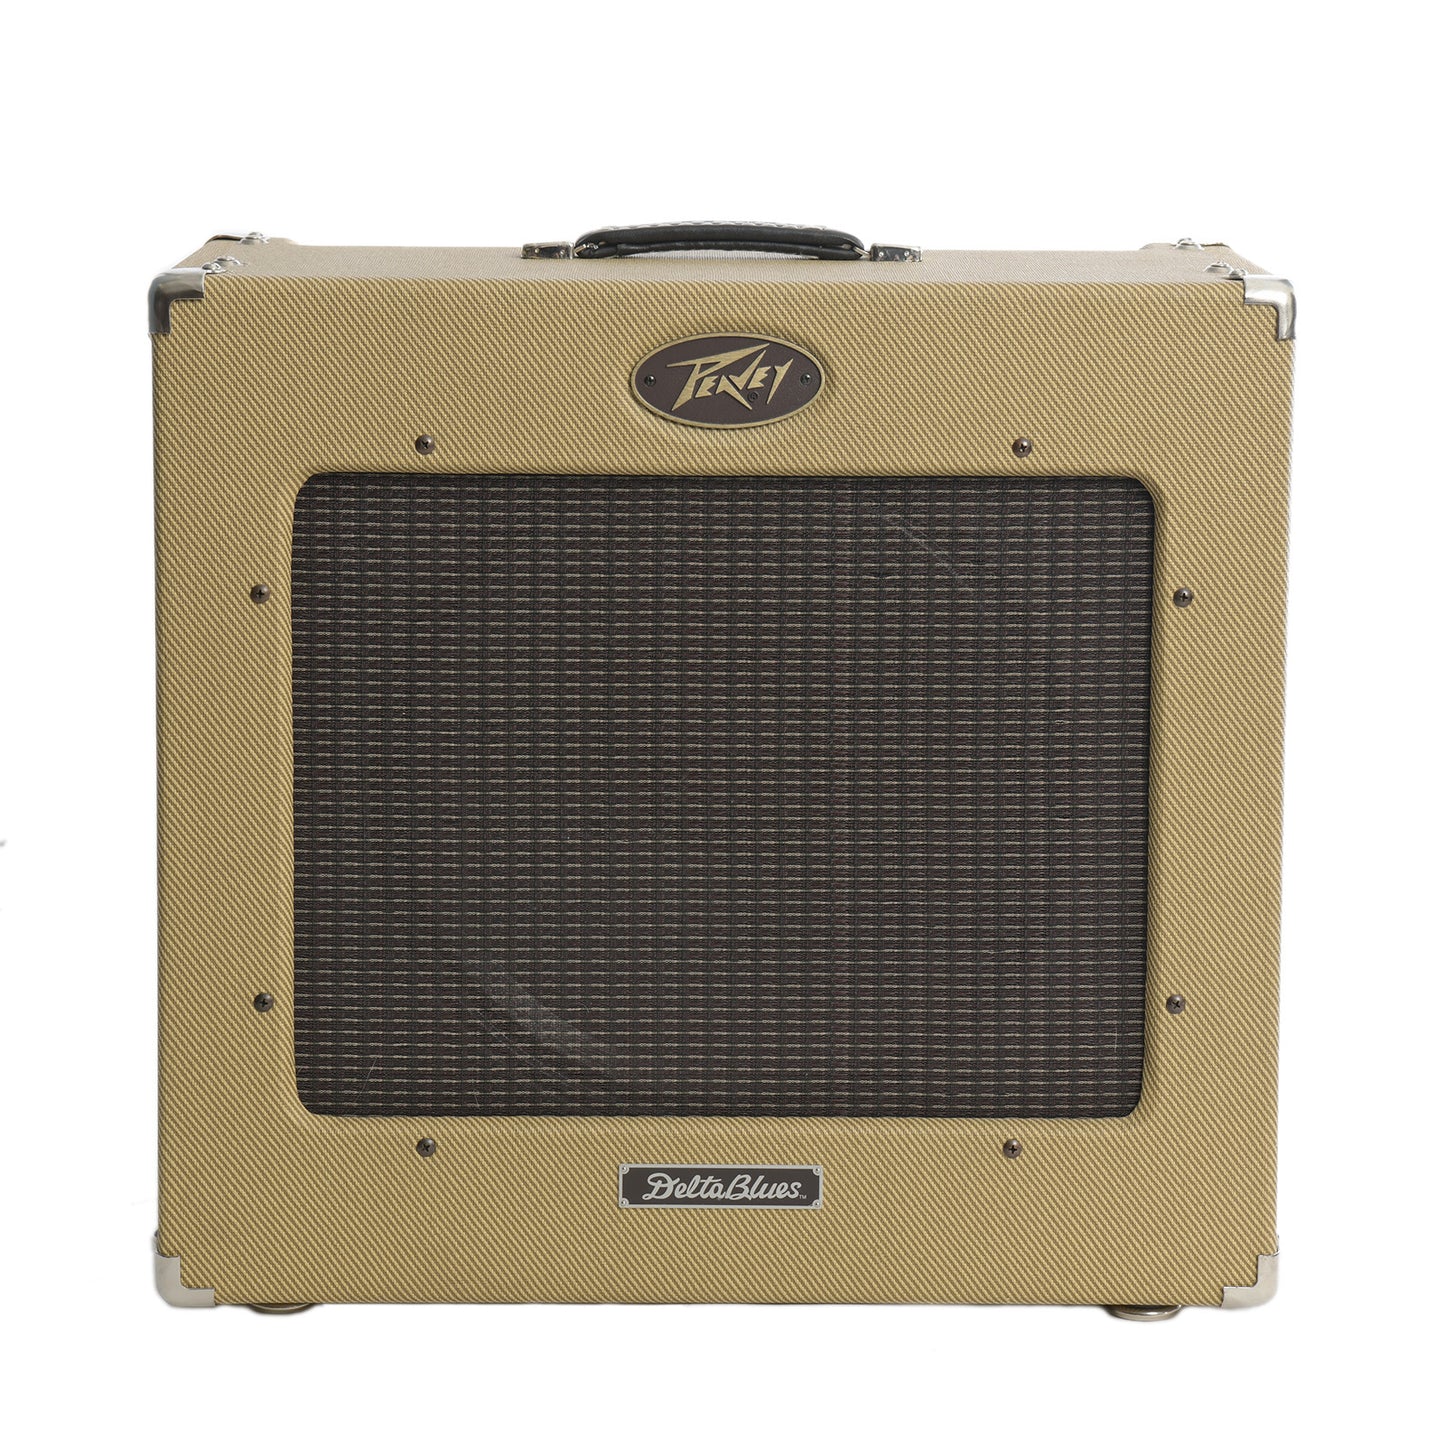 Front of Peavey Delta Blues 115 Combo Amp